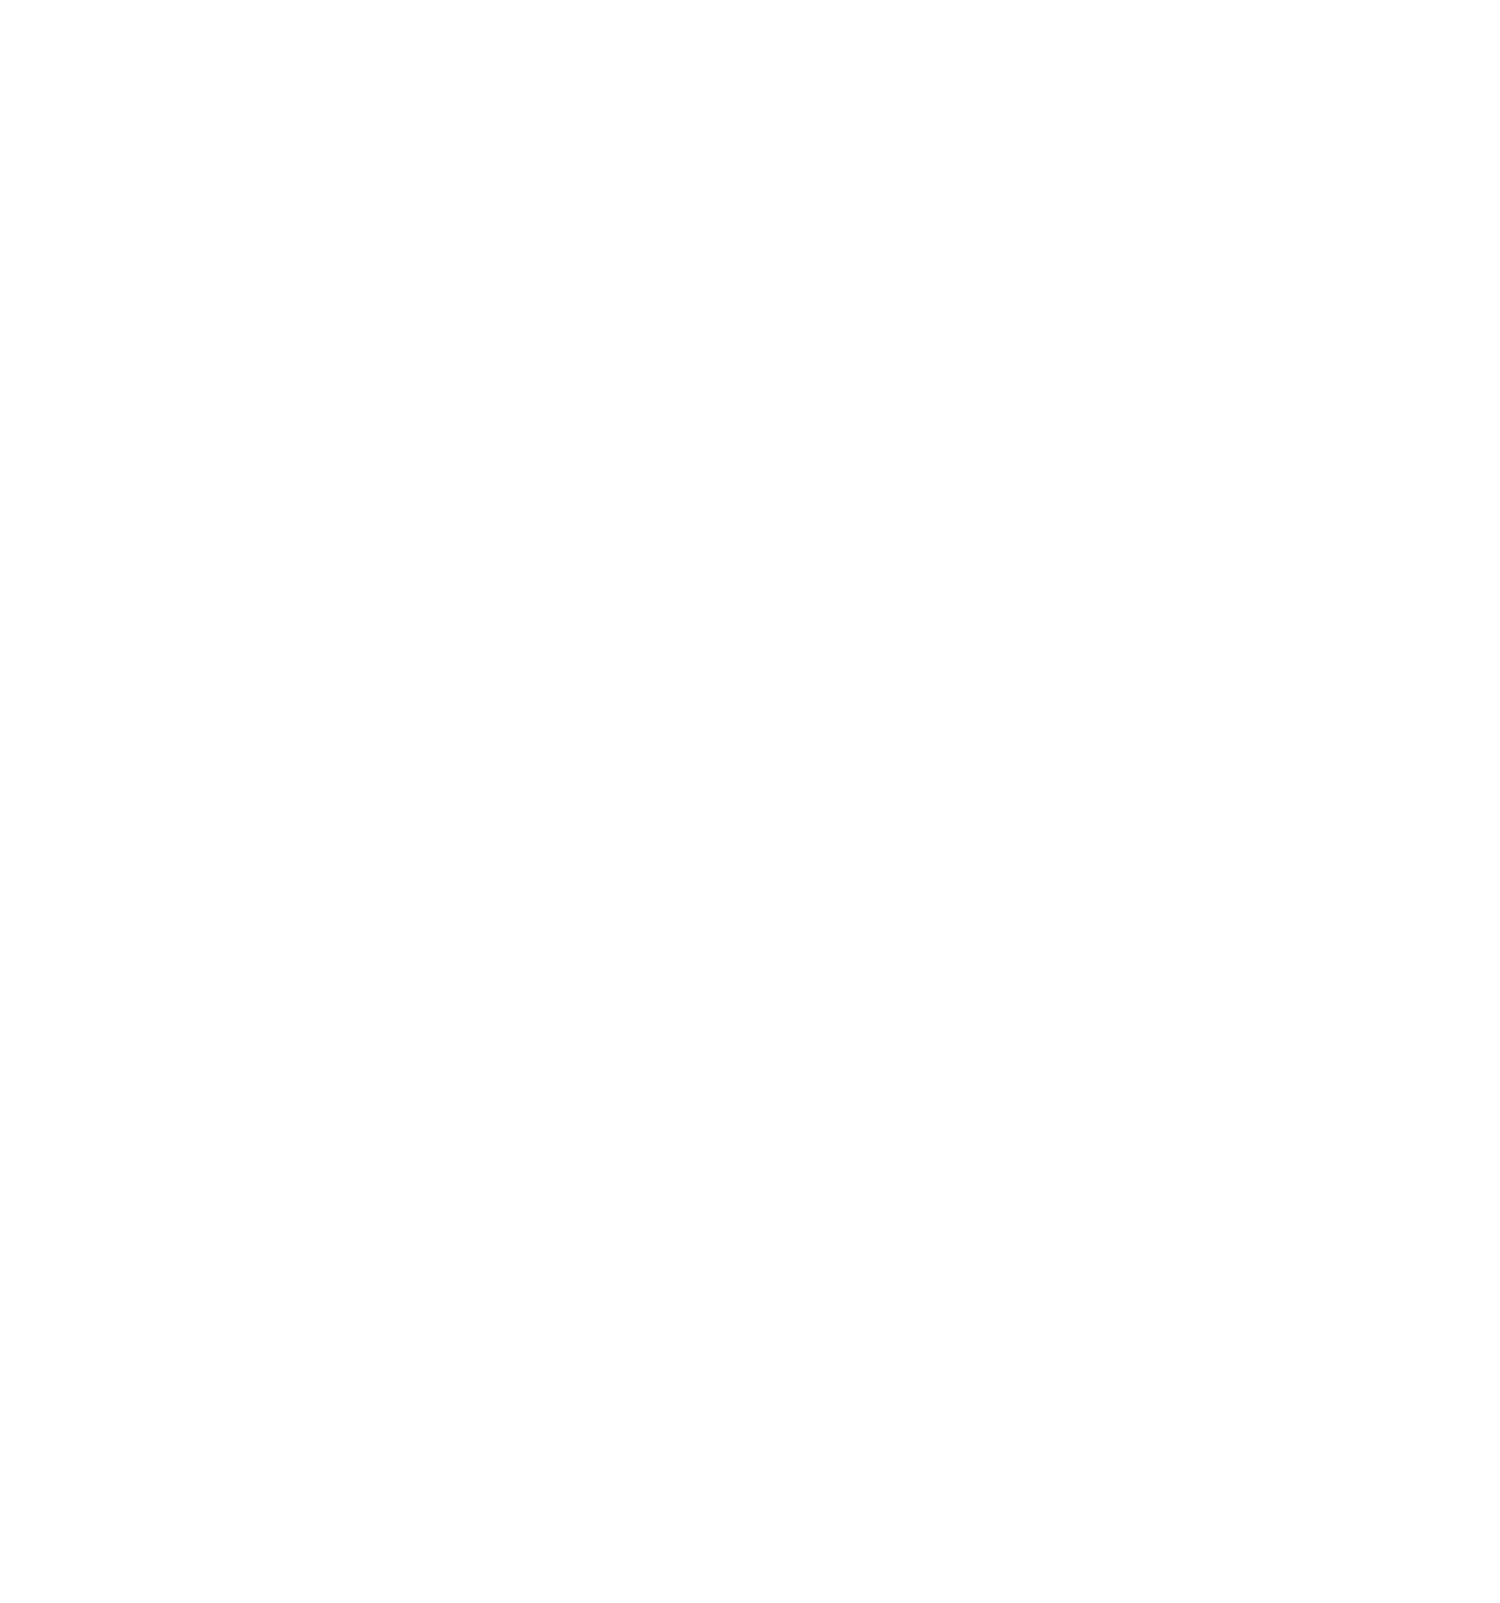 Tenterfield Care Centre Limited